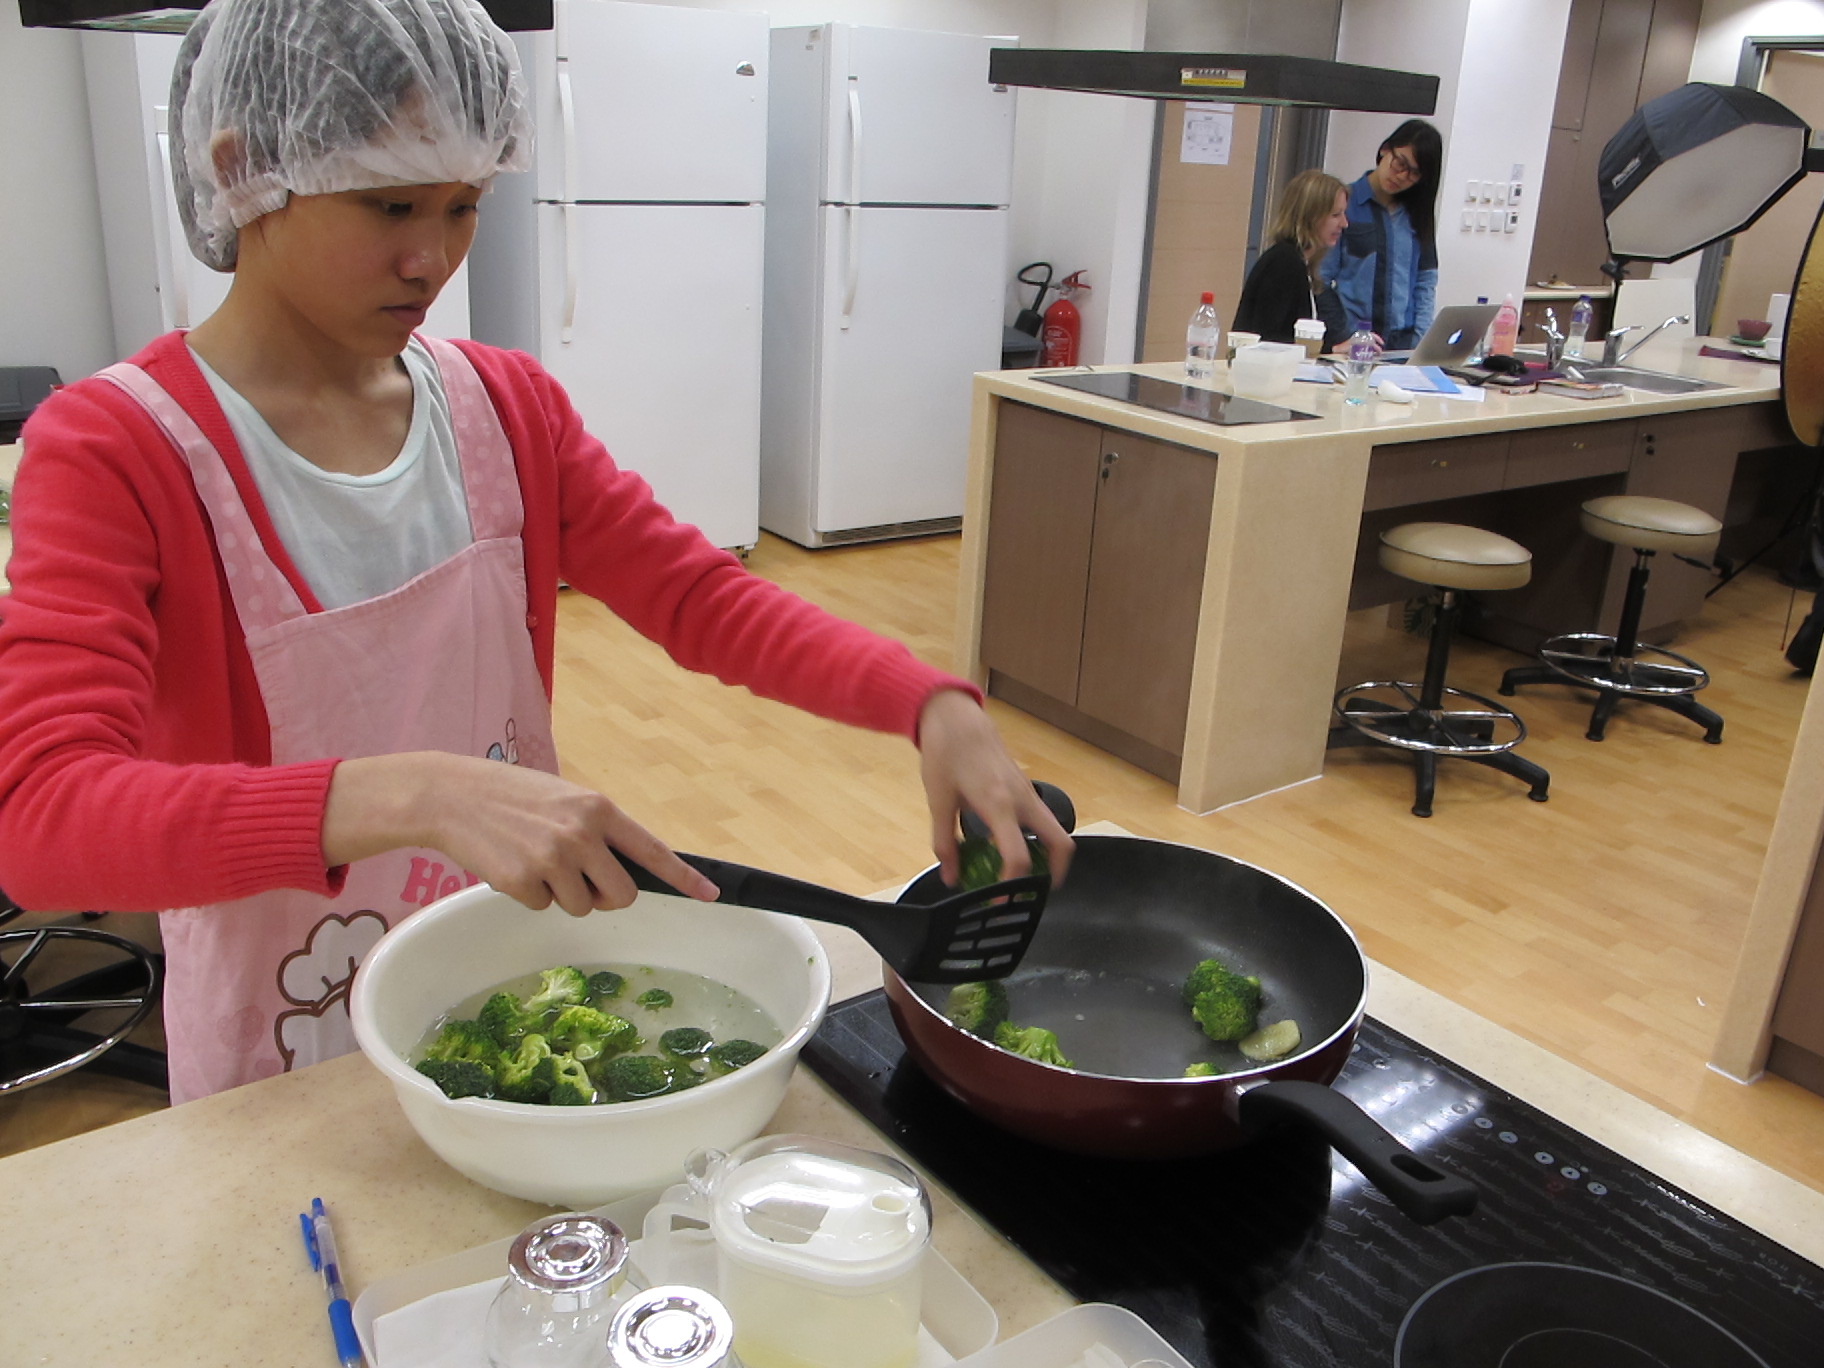 Feeding Hong Kong – Prepare nutritious, simple and low budget cookbook for the needy - Photo - 59